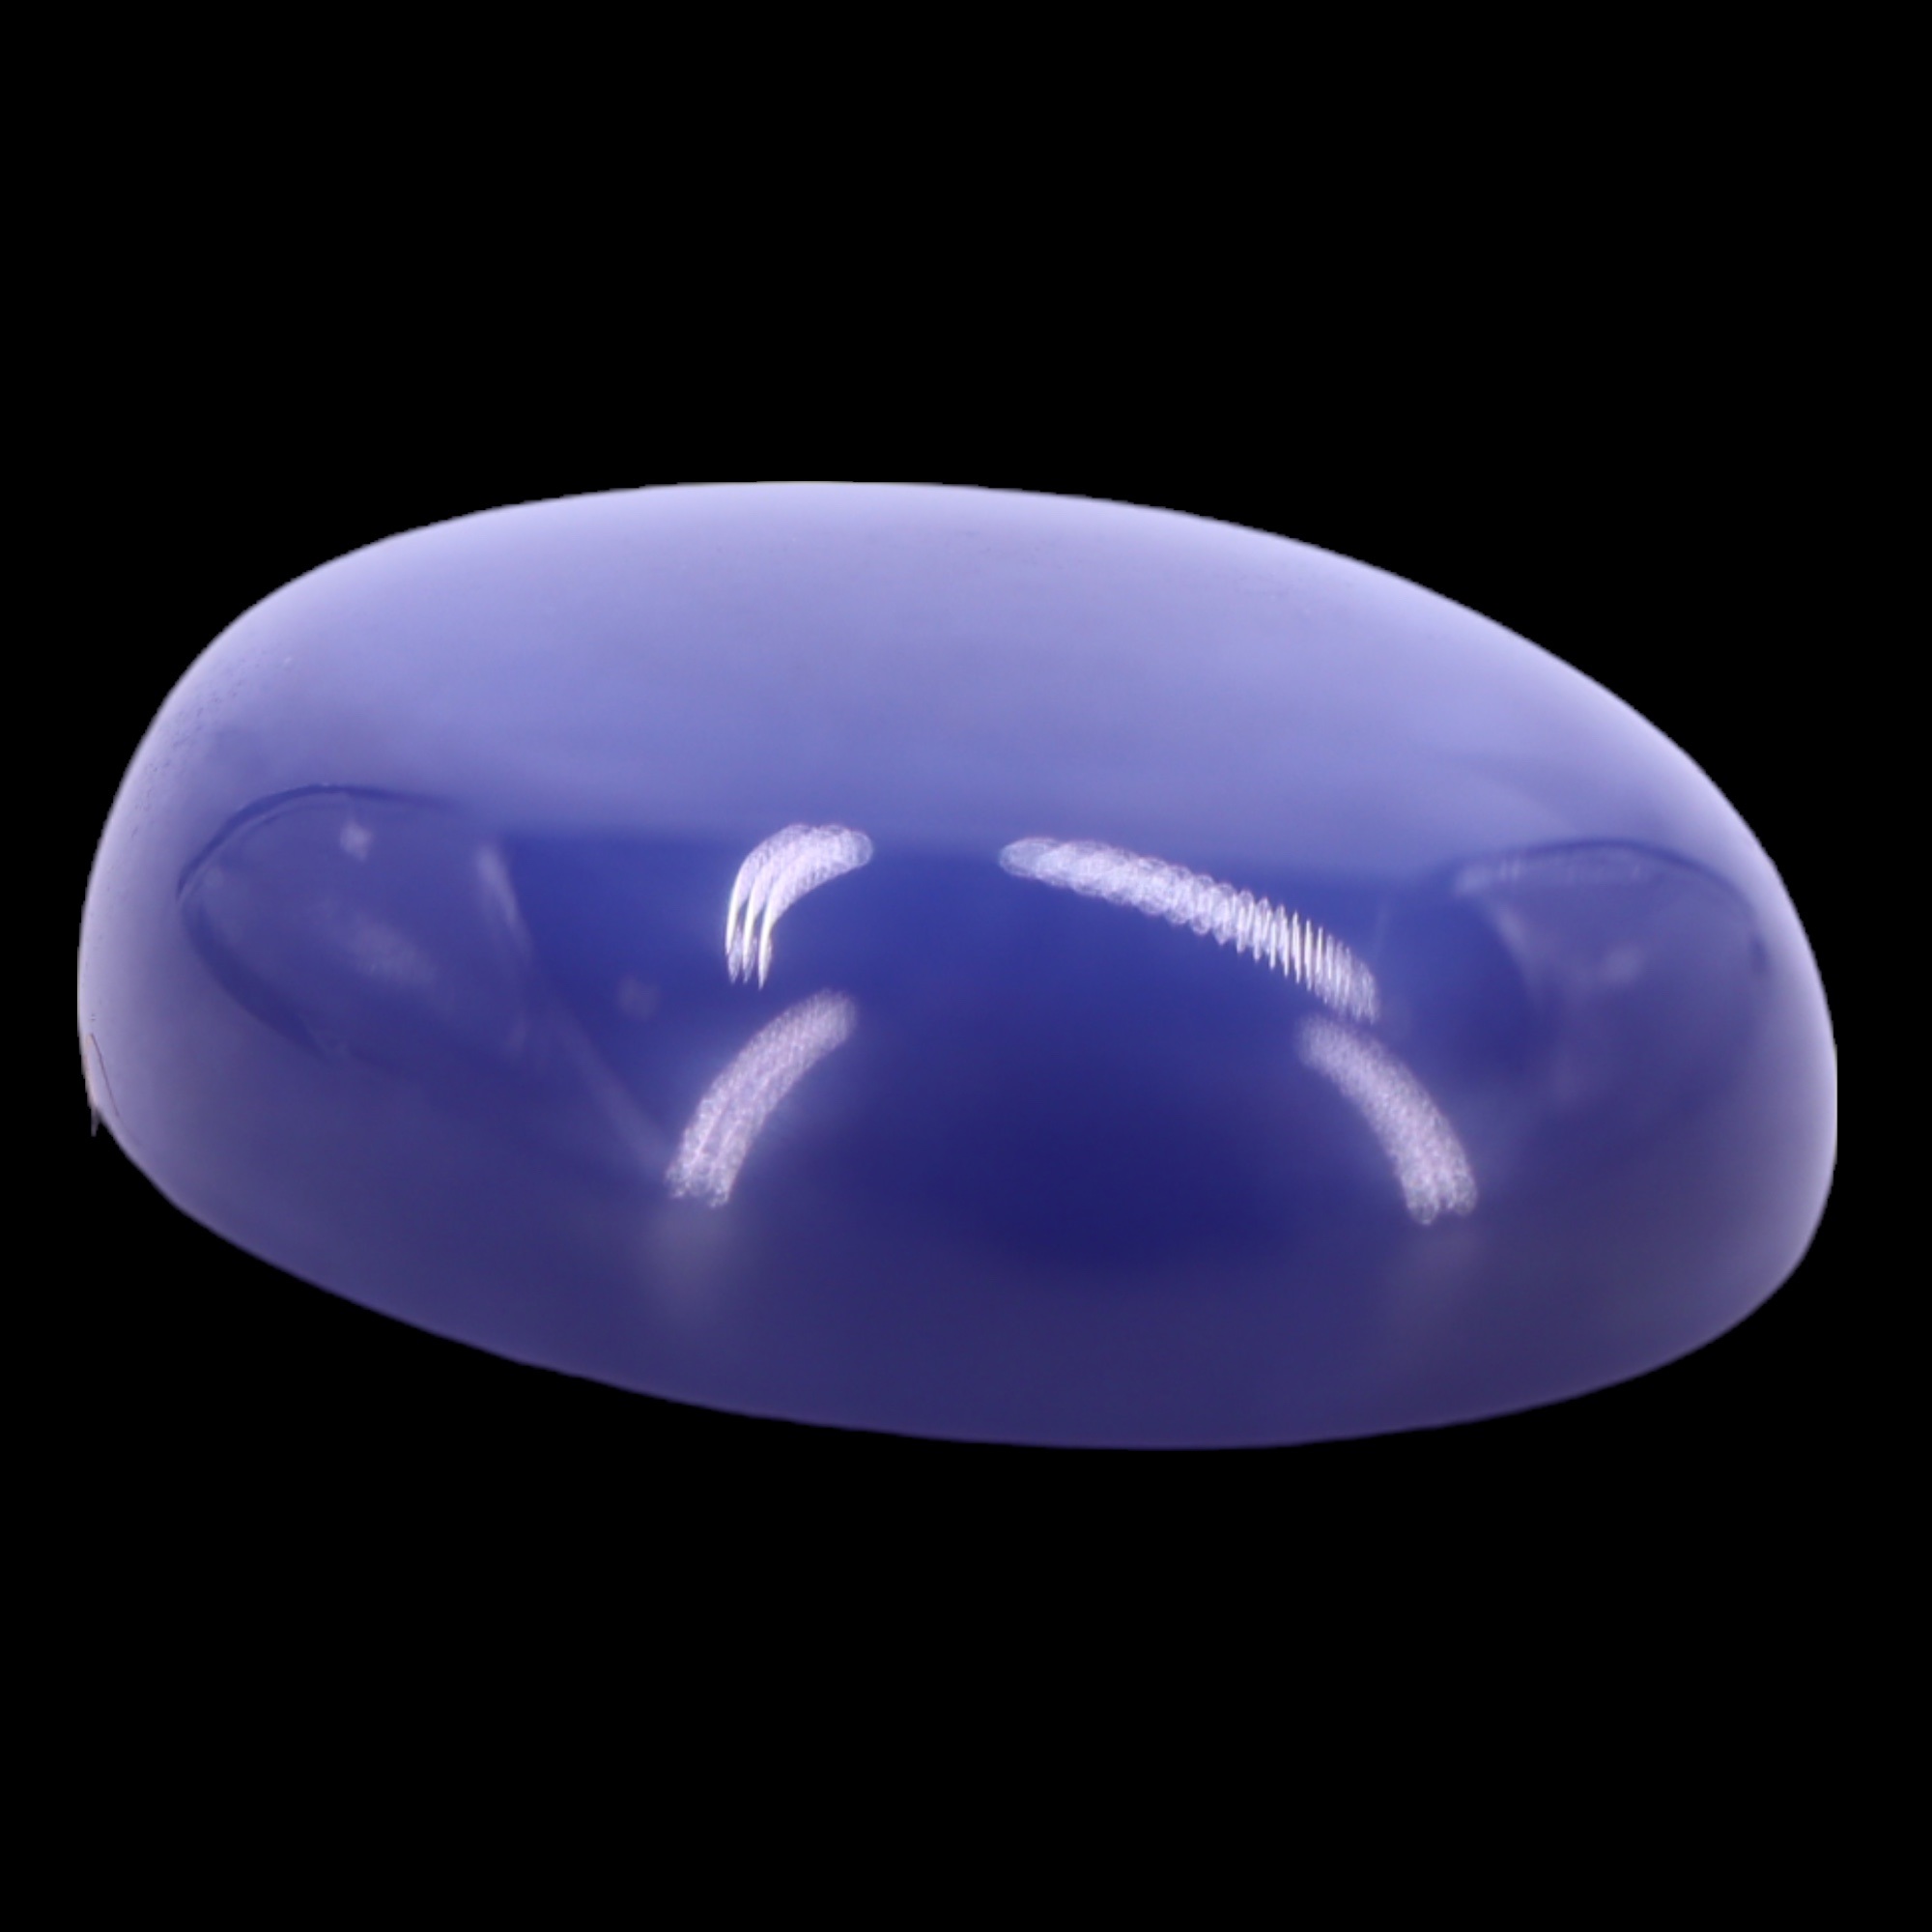 A six-ray star sapphire oval cabochon, 15.5 mm x 13 mm - Image 2 of 3